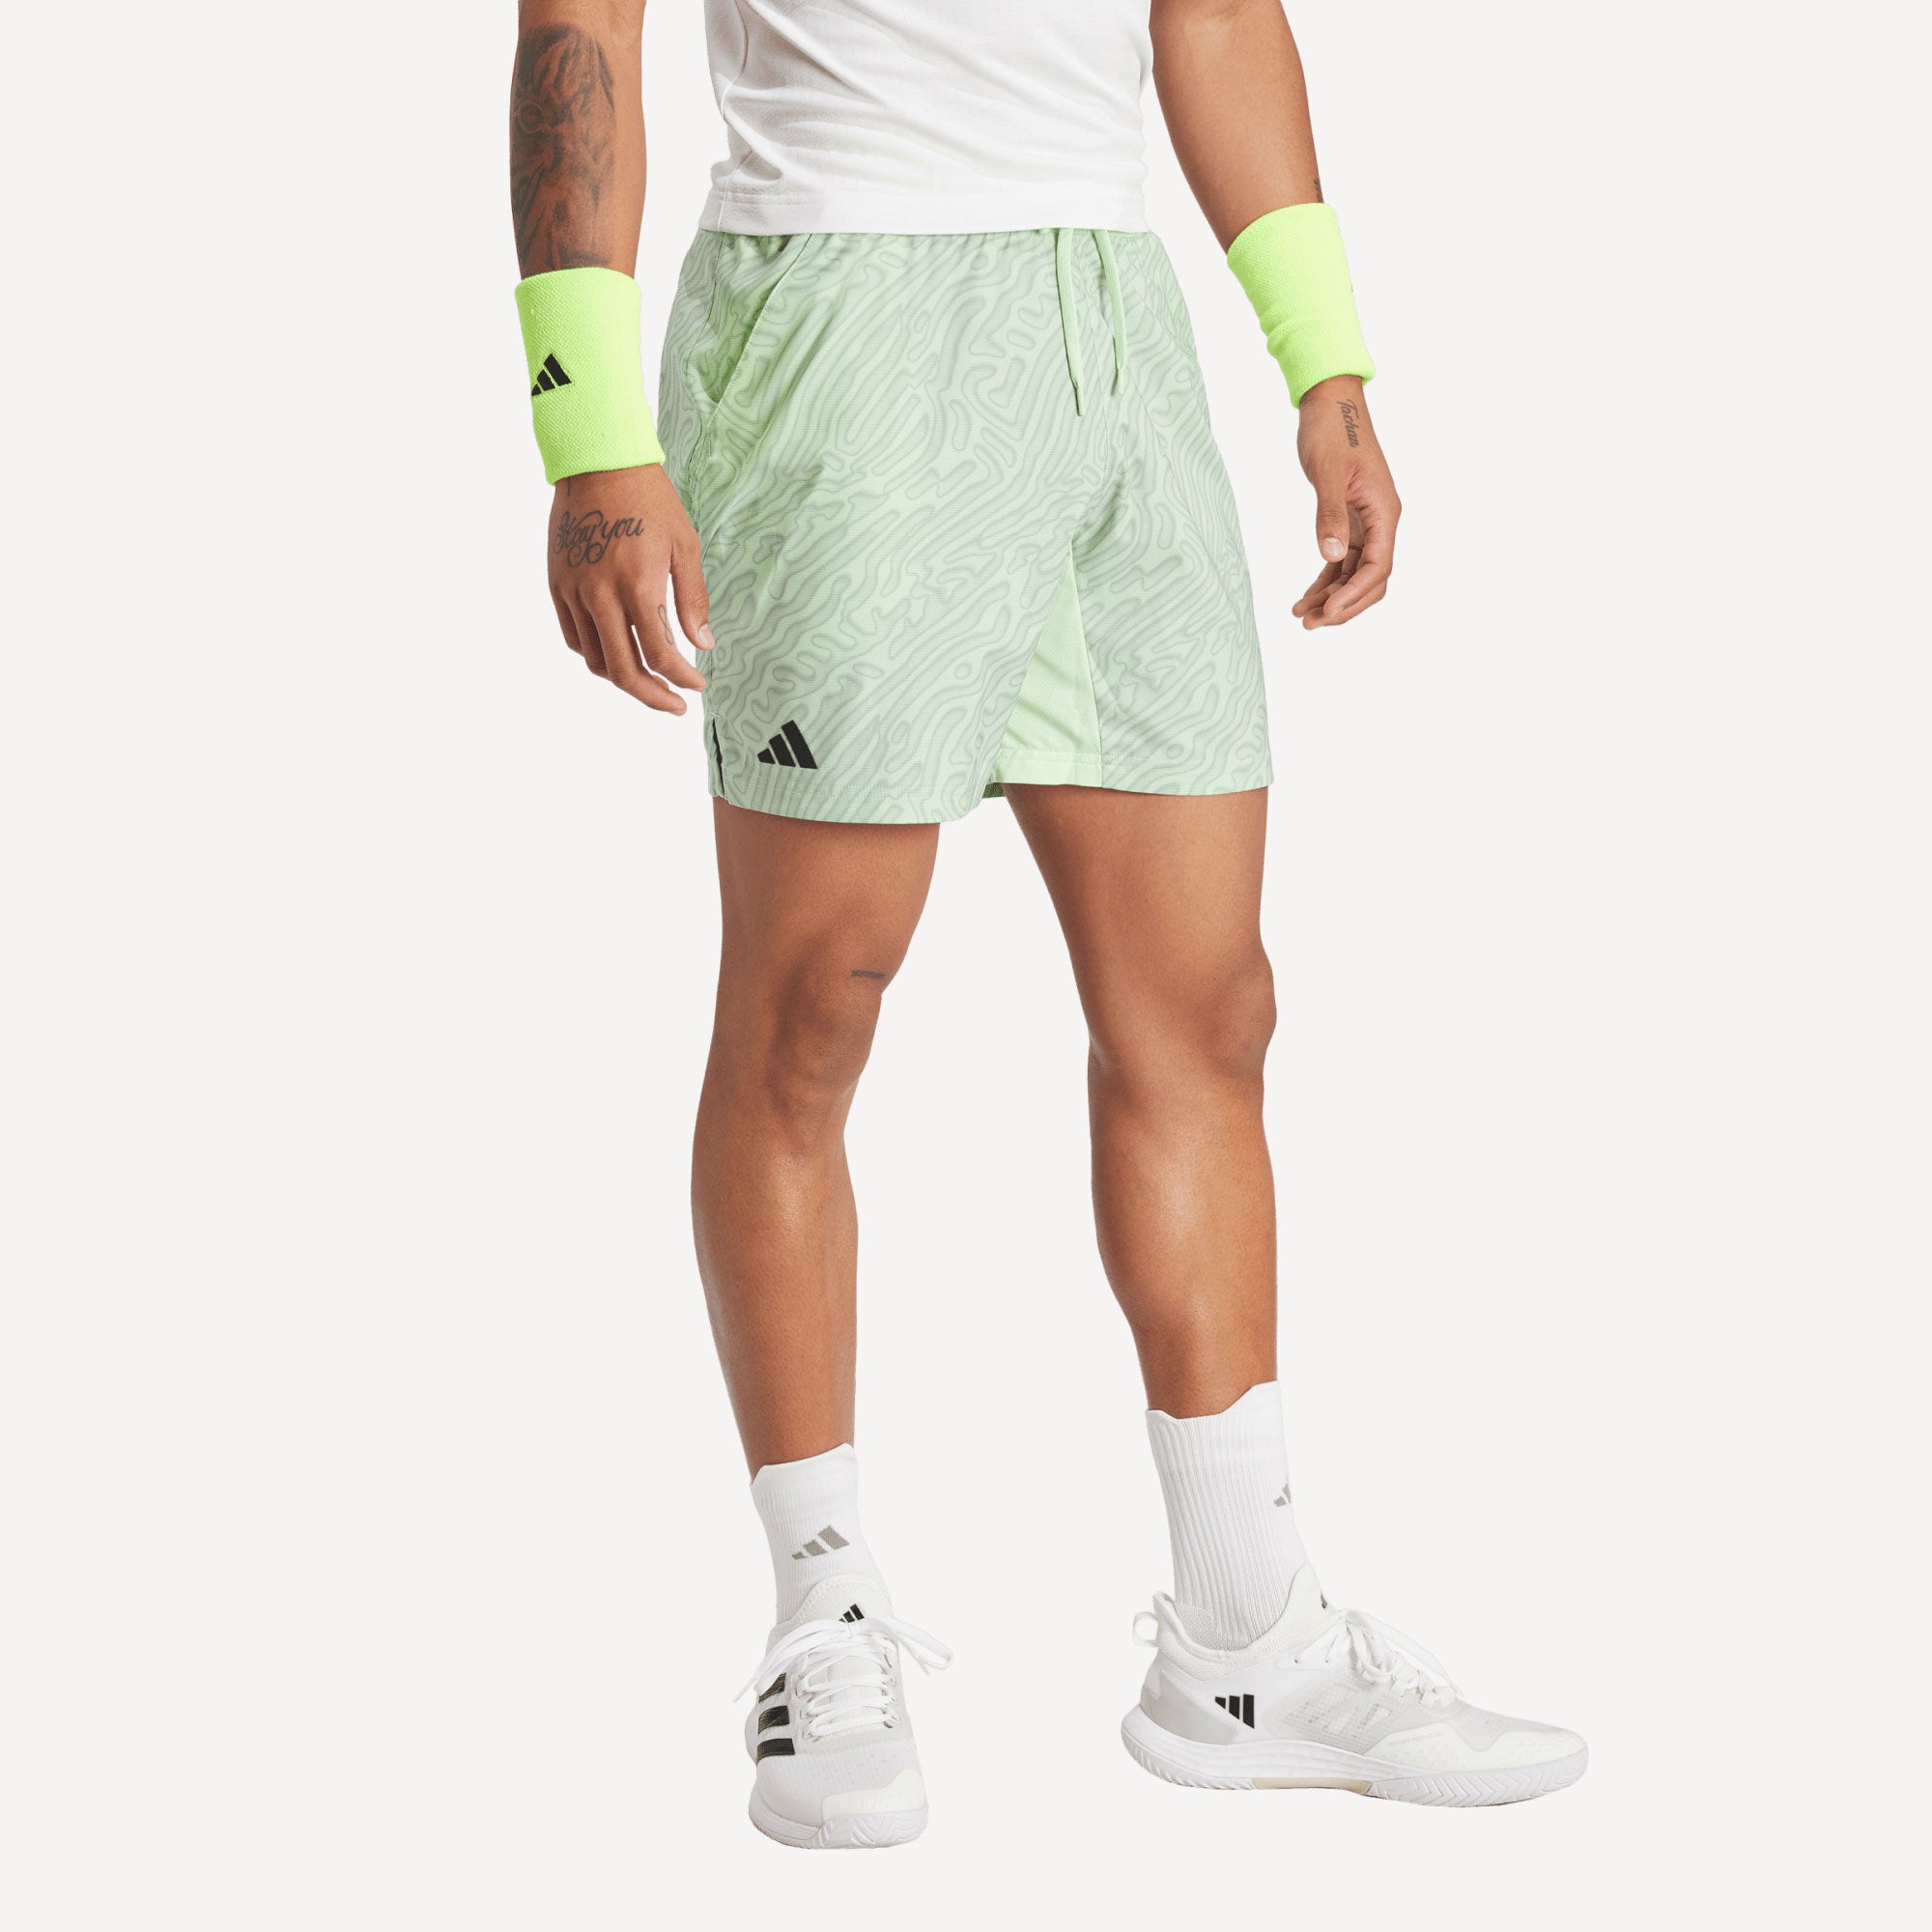 adidas Pro Melbourne Men's Printed 7-Inch Tennis Shorts - Green (3)